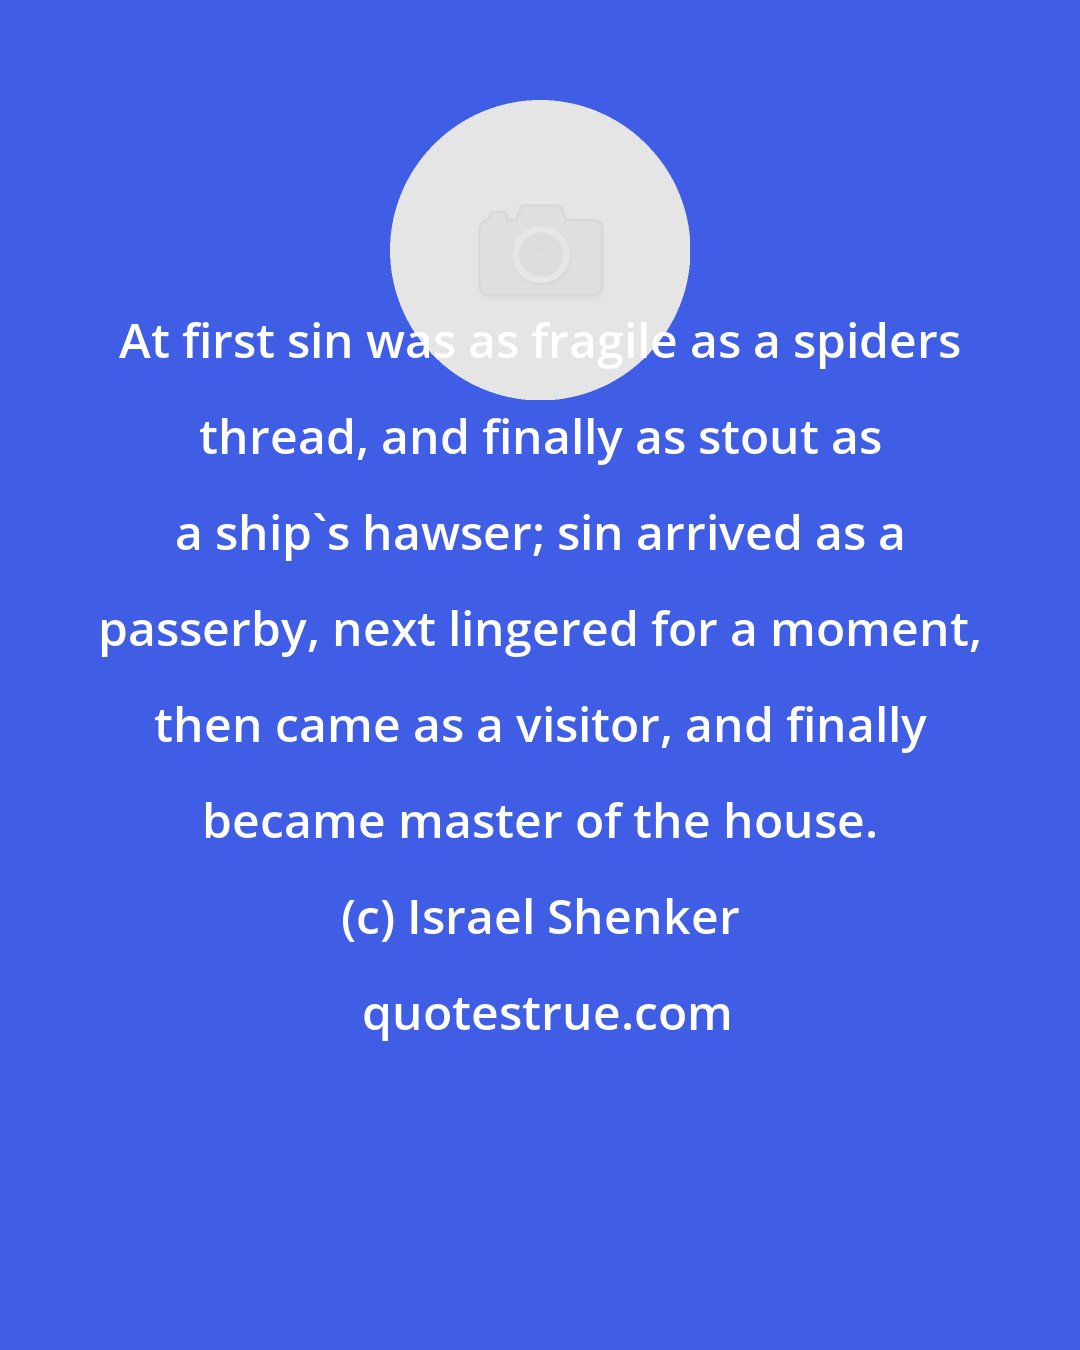 Israel Shenker: At first sin was as fragile as a spiders thread, and finally as stout as a ship's hawser; sin arrived as a passerby, next lingered for a moment, then came as a visitor, and finally became master of the house.